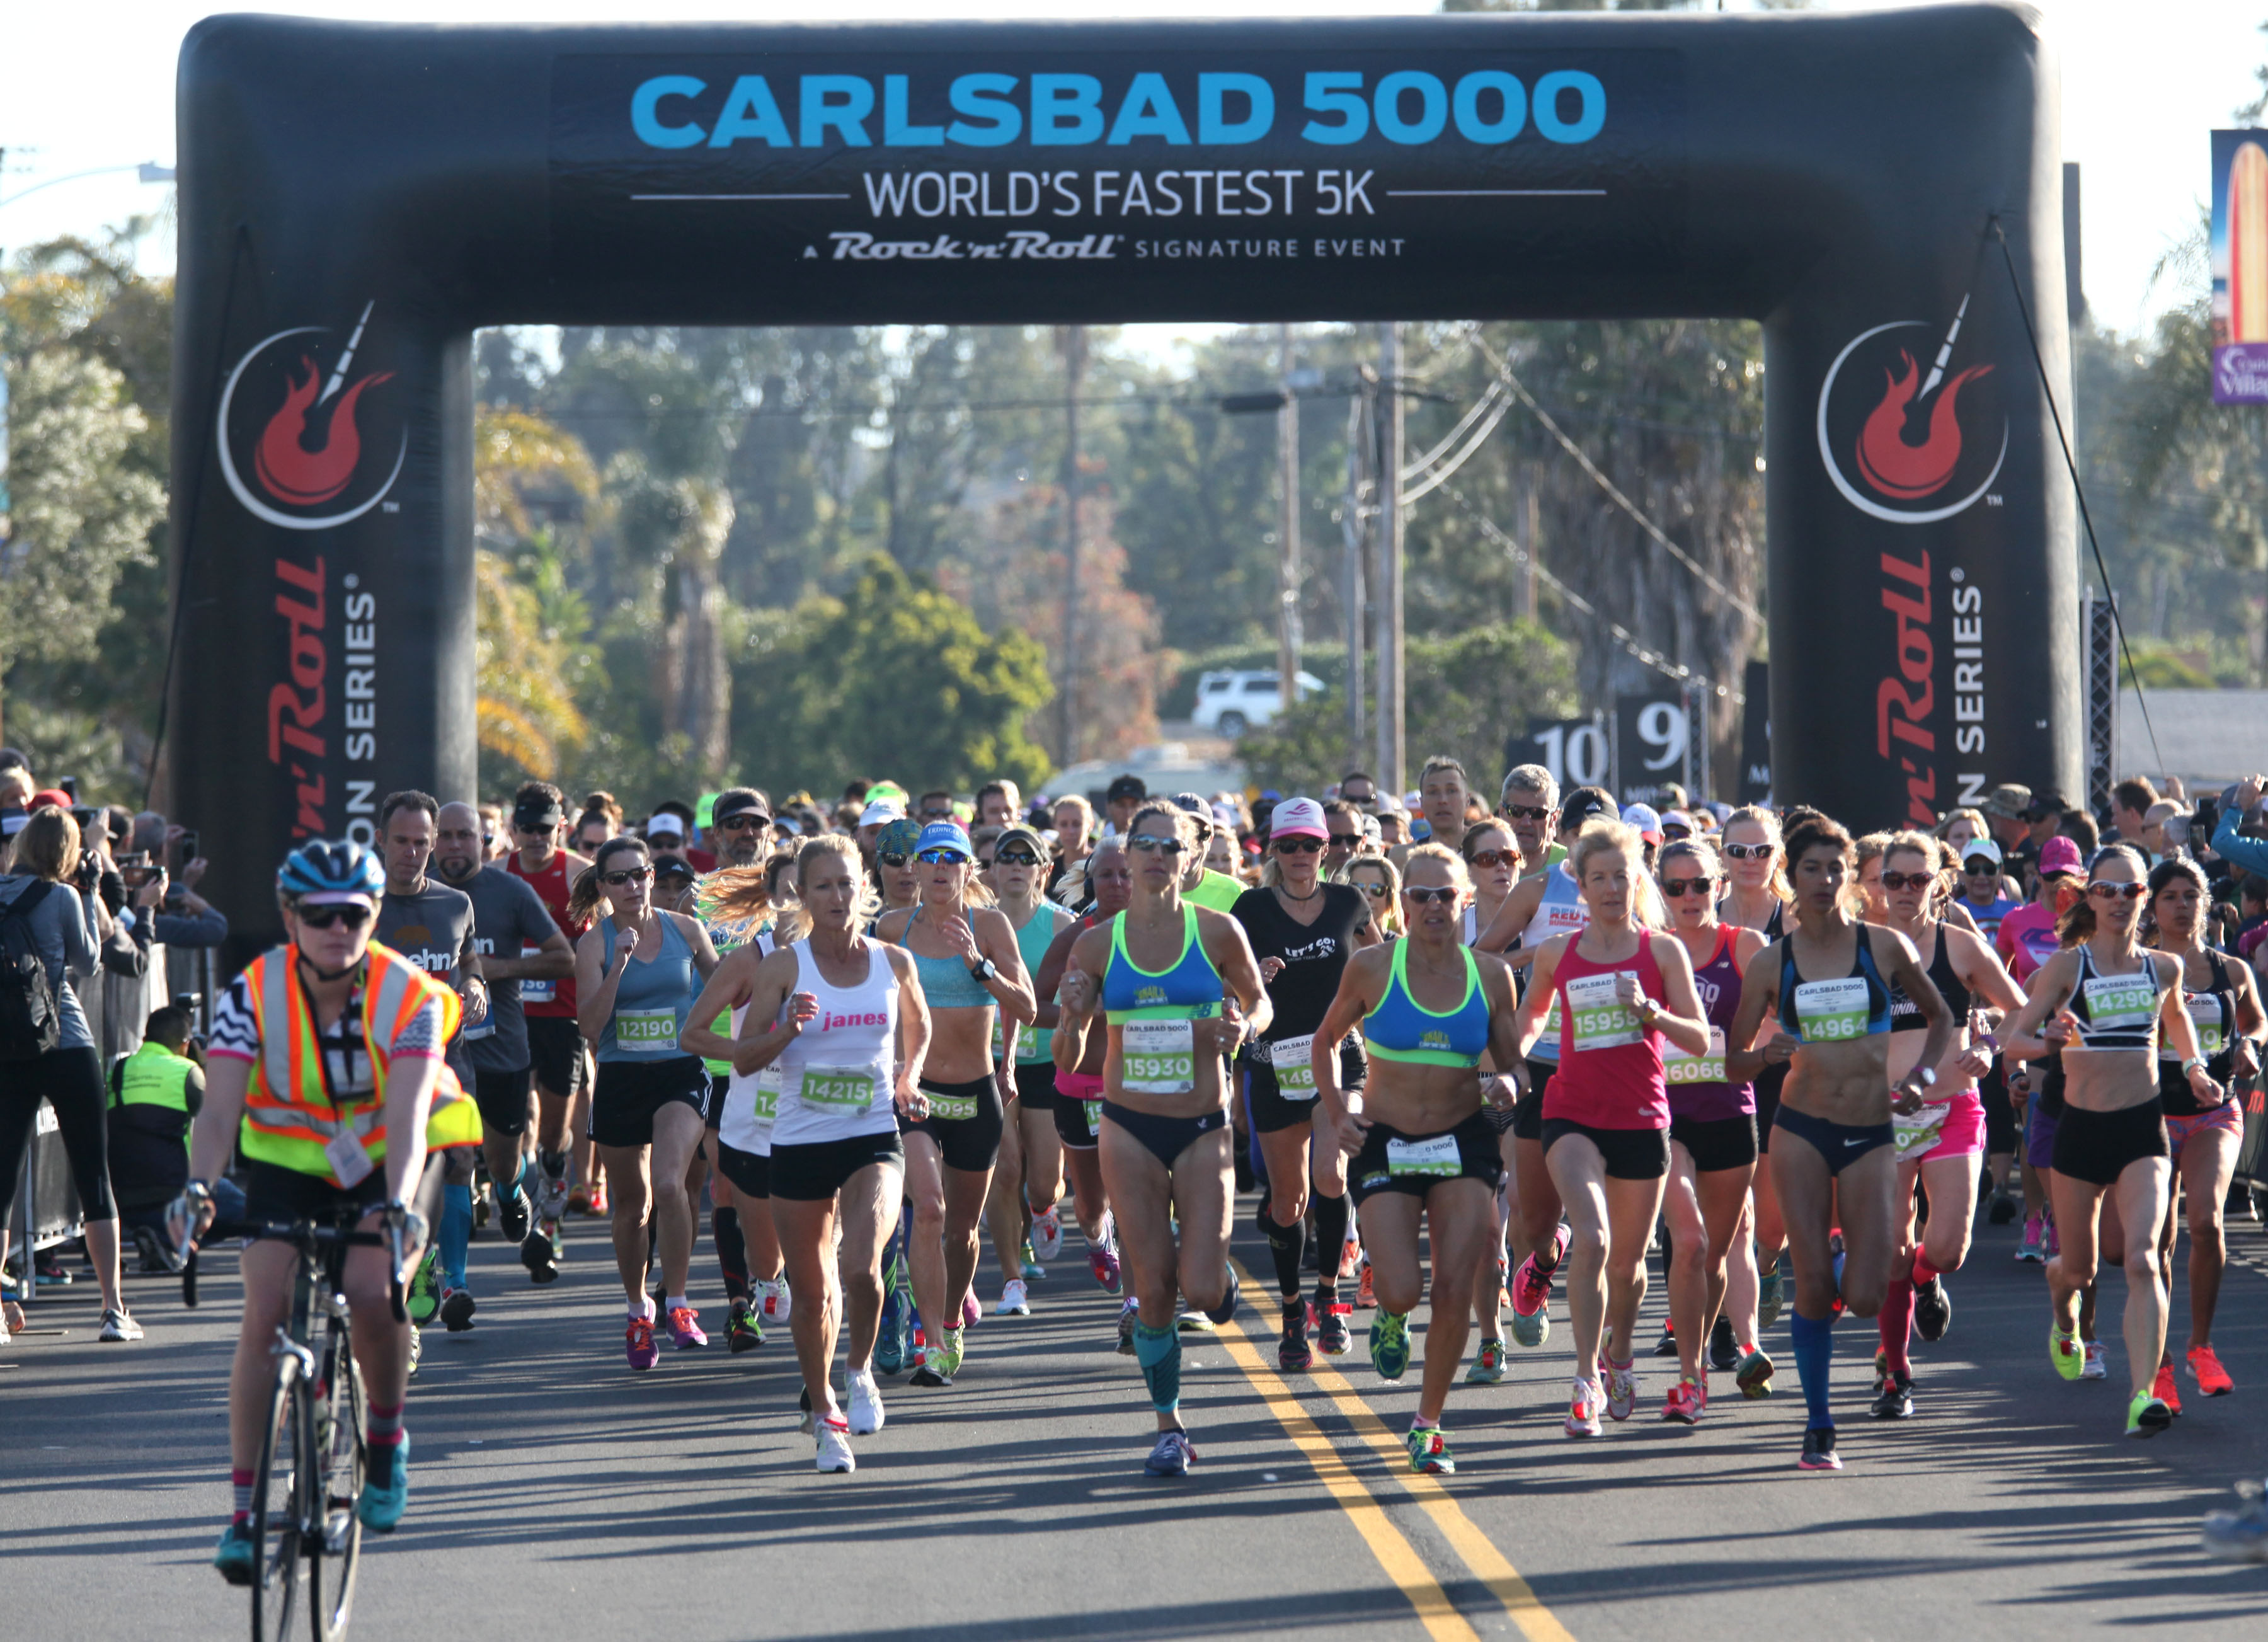 Race to the finish line or your next discovery, Carlsbad active events